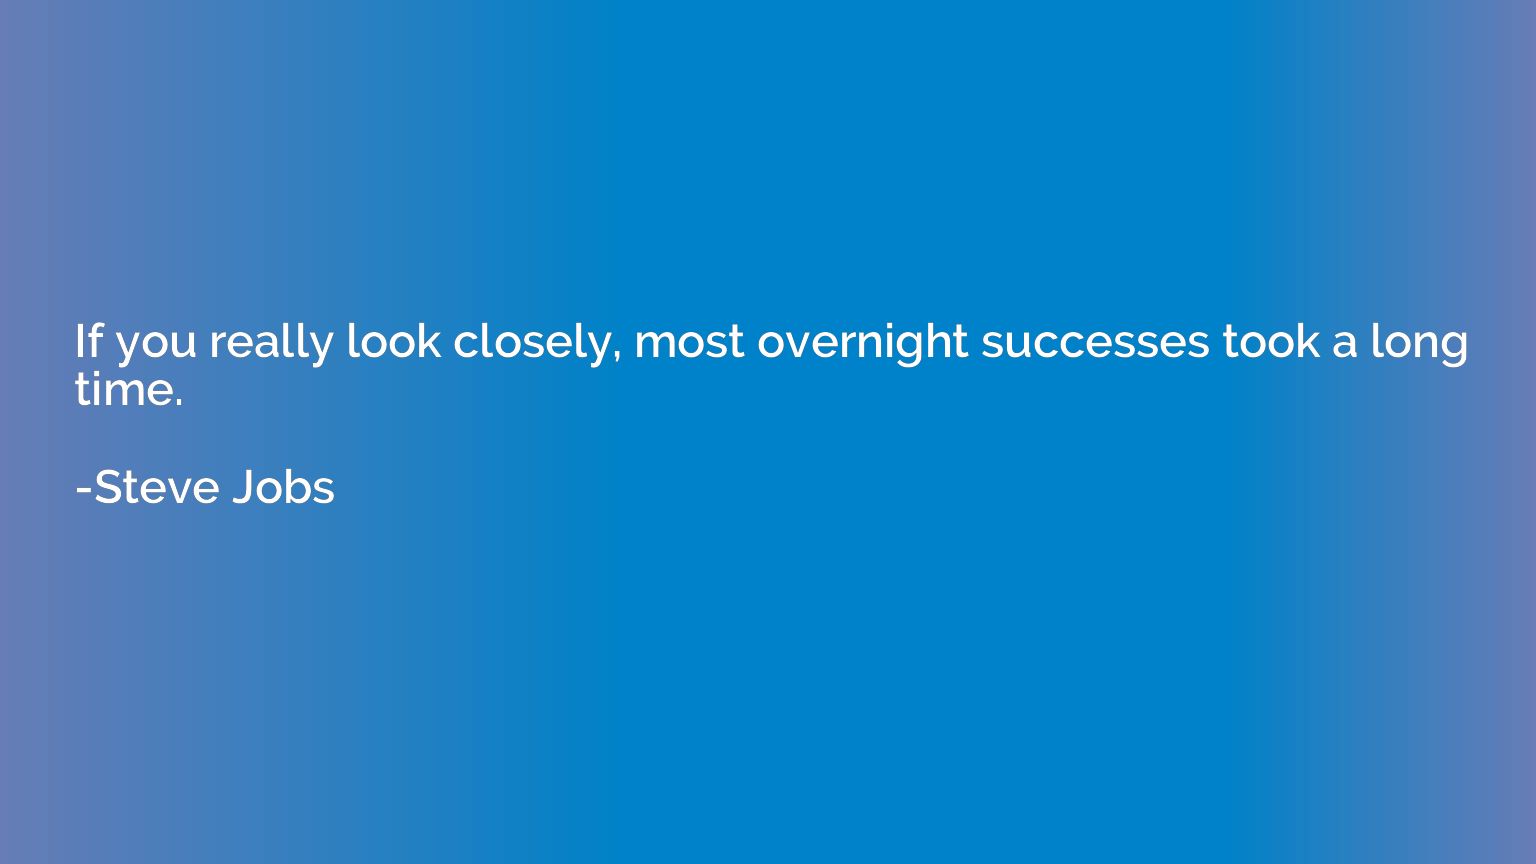 If you really look closely, most overnight successes took a 